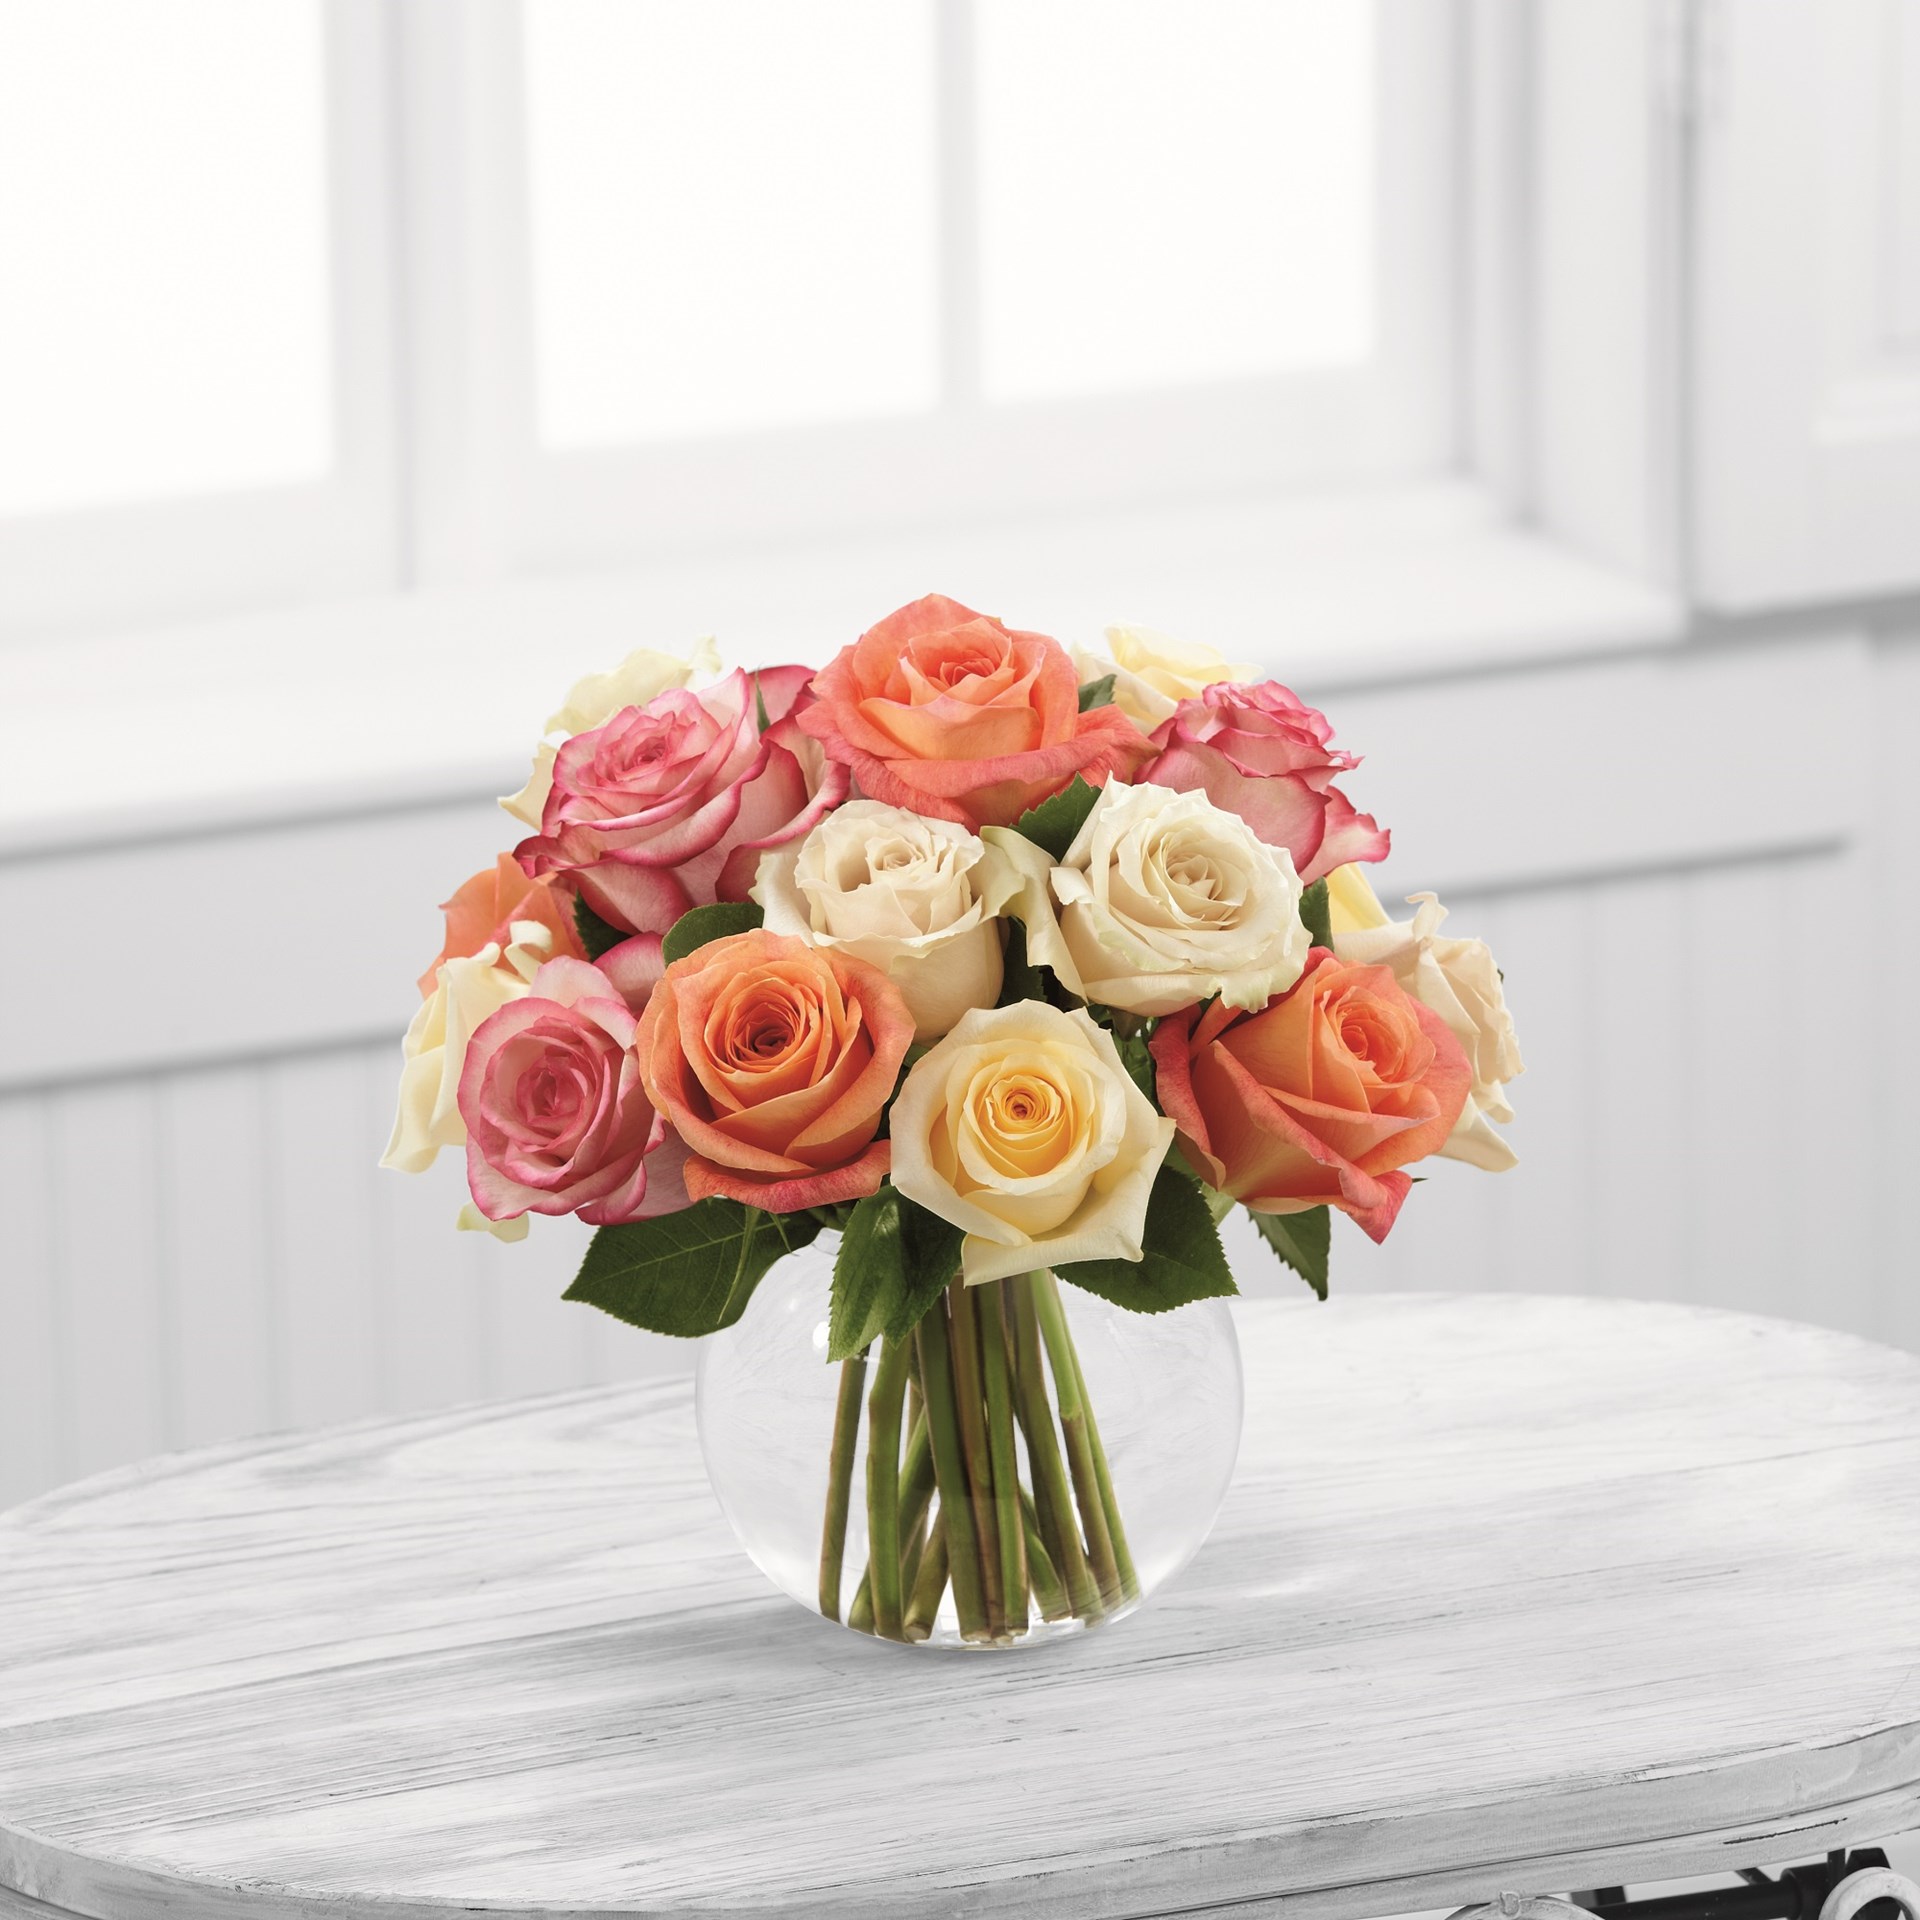 product image for The FTD Sundance Rose Bouquet